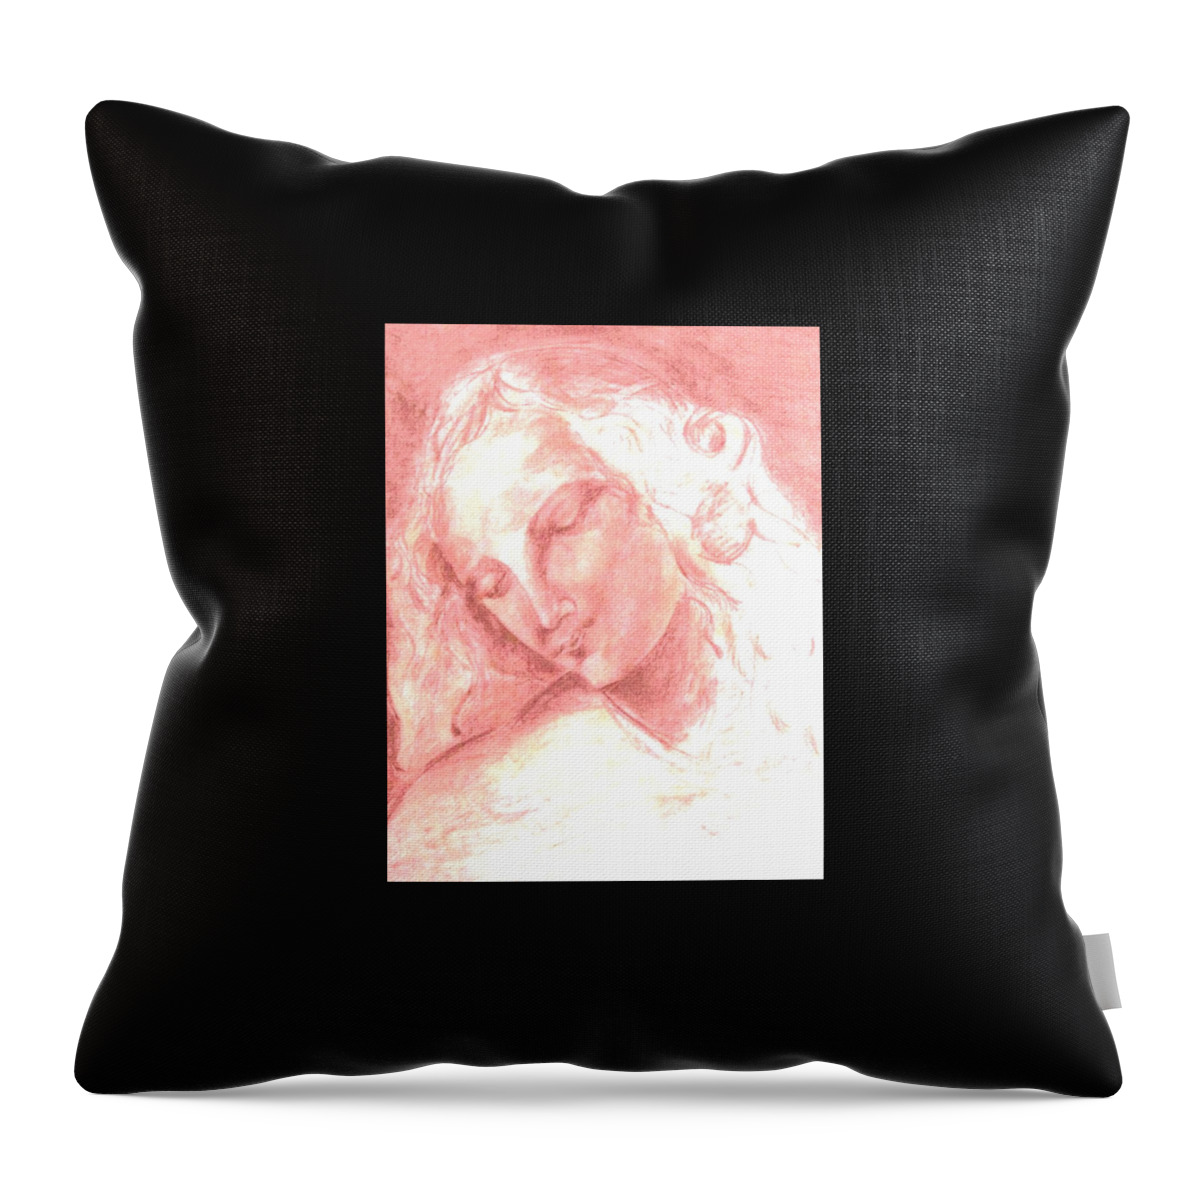 Portrait Throw Pillow featuring the painting Blonde by Dawn Caravetta